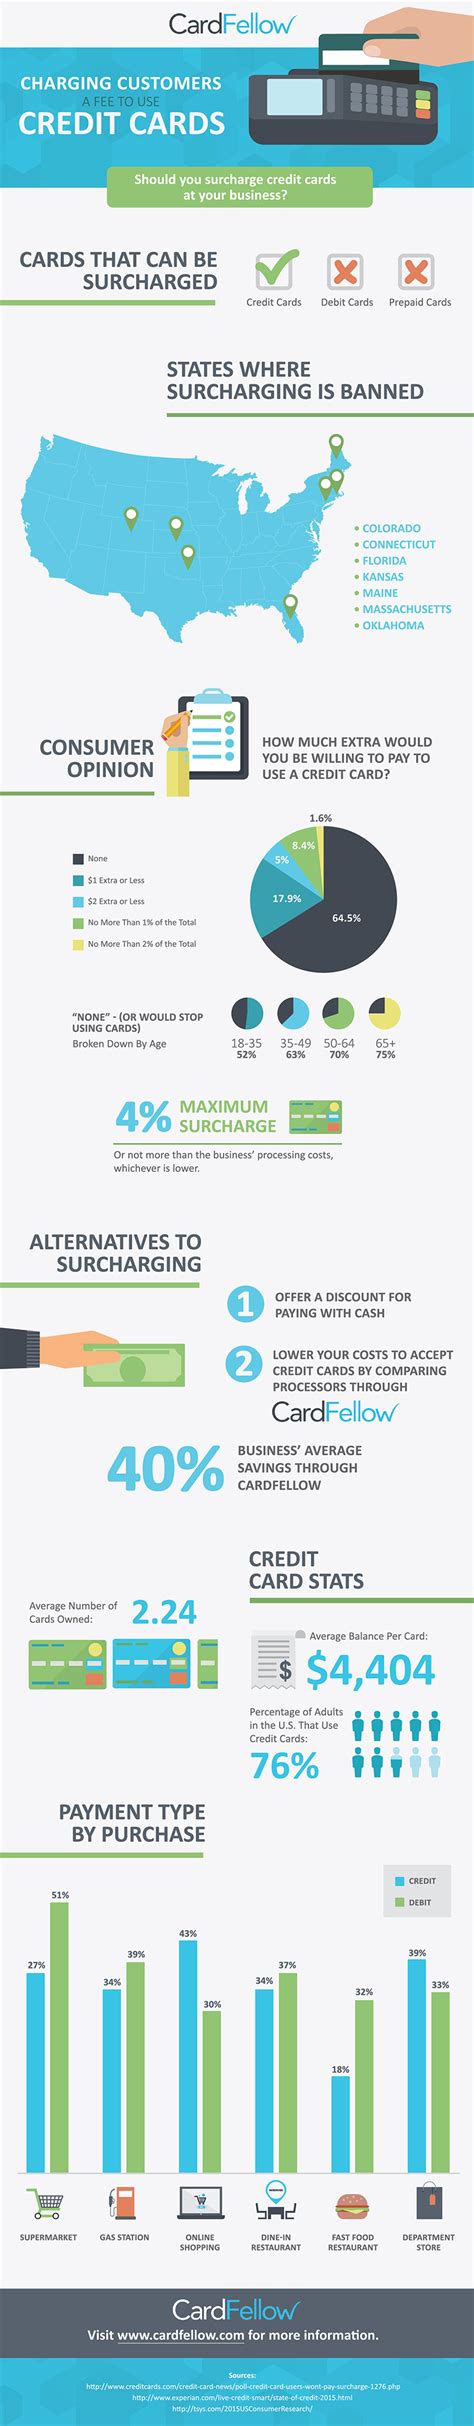 Credit card interest can be confusing. Credit Card Surcharging - Adding Fees to Card Purchases